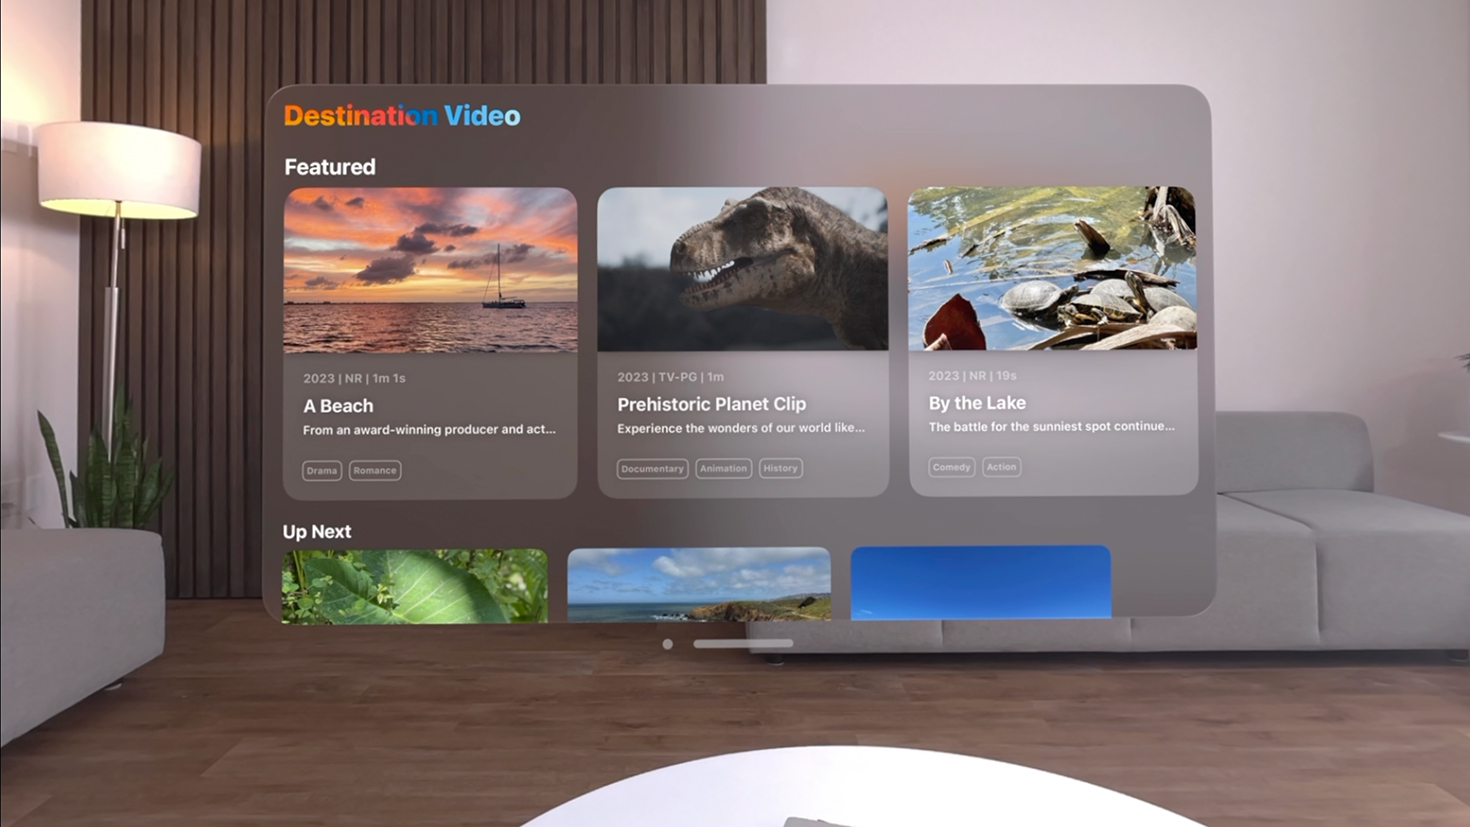 A screenshot of the Destination Video app on Apple Vision Pro. The screenshot appears front and center in a living room with white walls, gray couches, and a dark wood floor. The Destination Video app shows a section titled Featuring that contains three video options: A Beach, Prehistoric Planet Clip, and By the Lake.